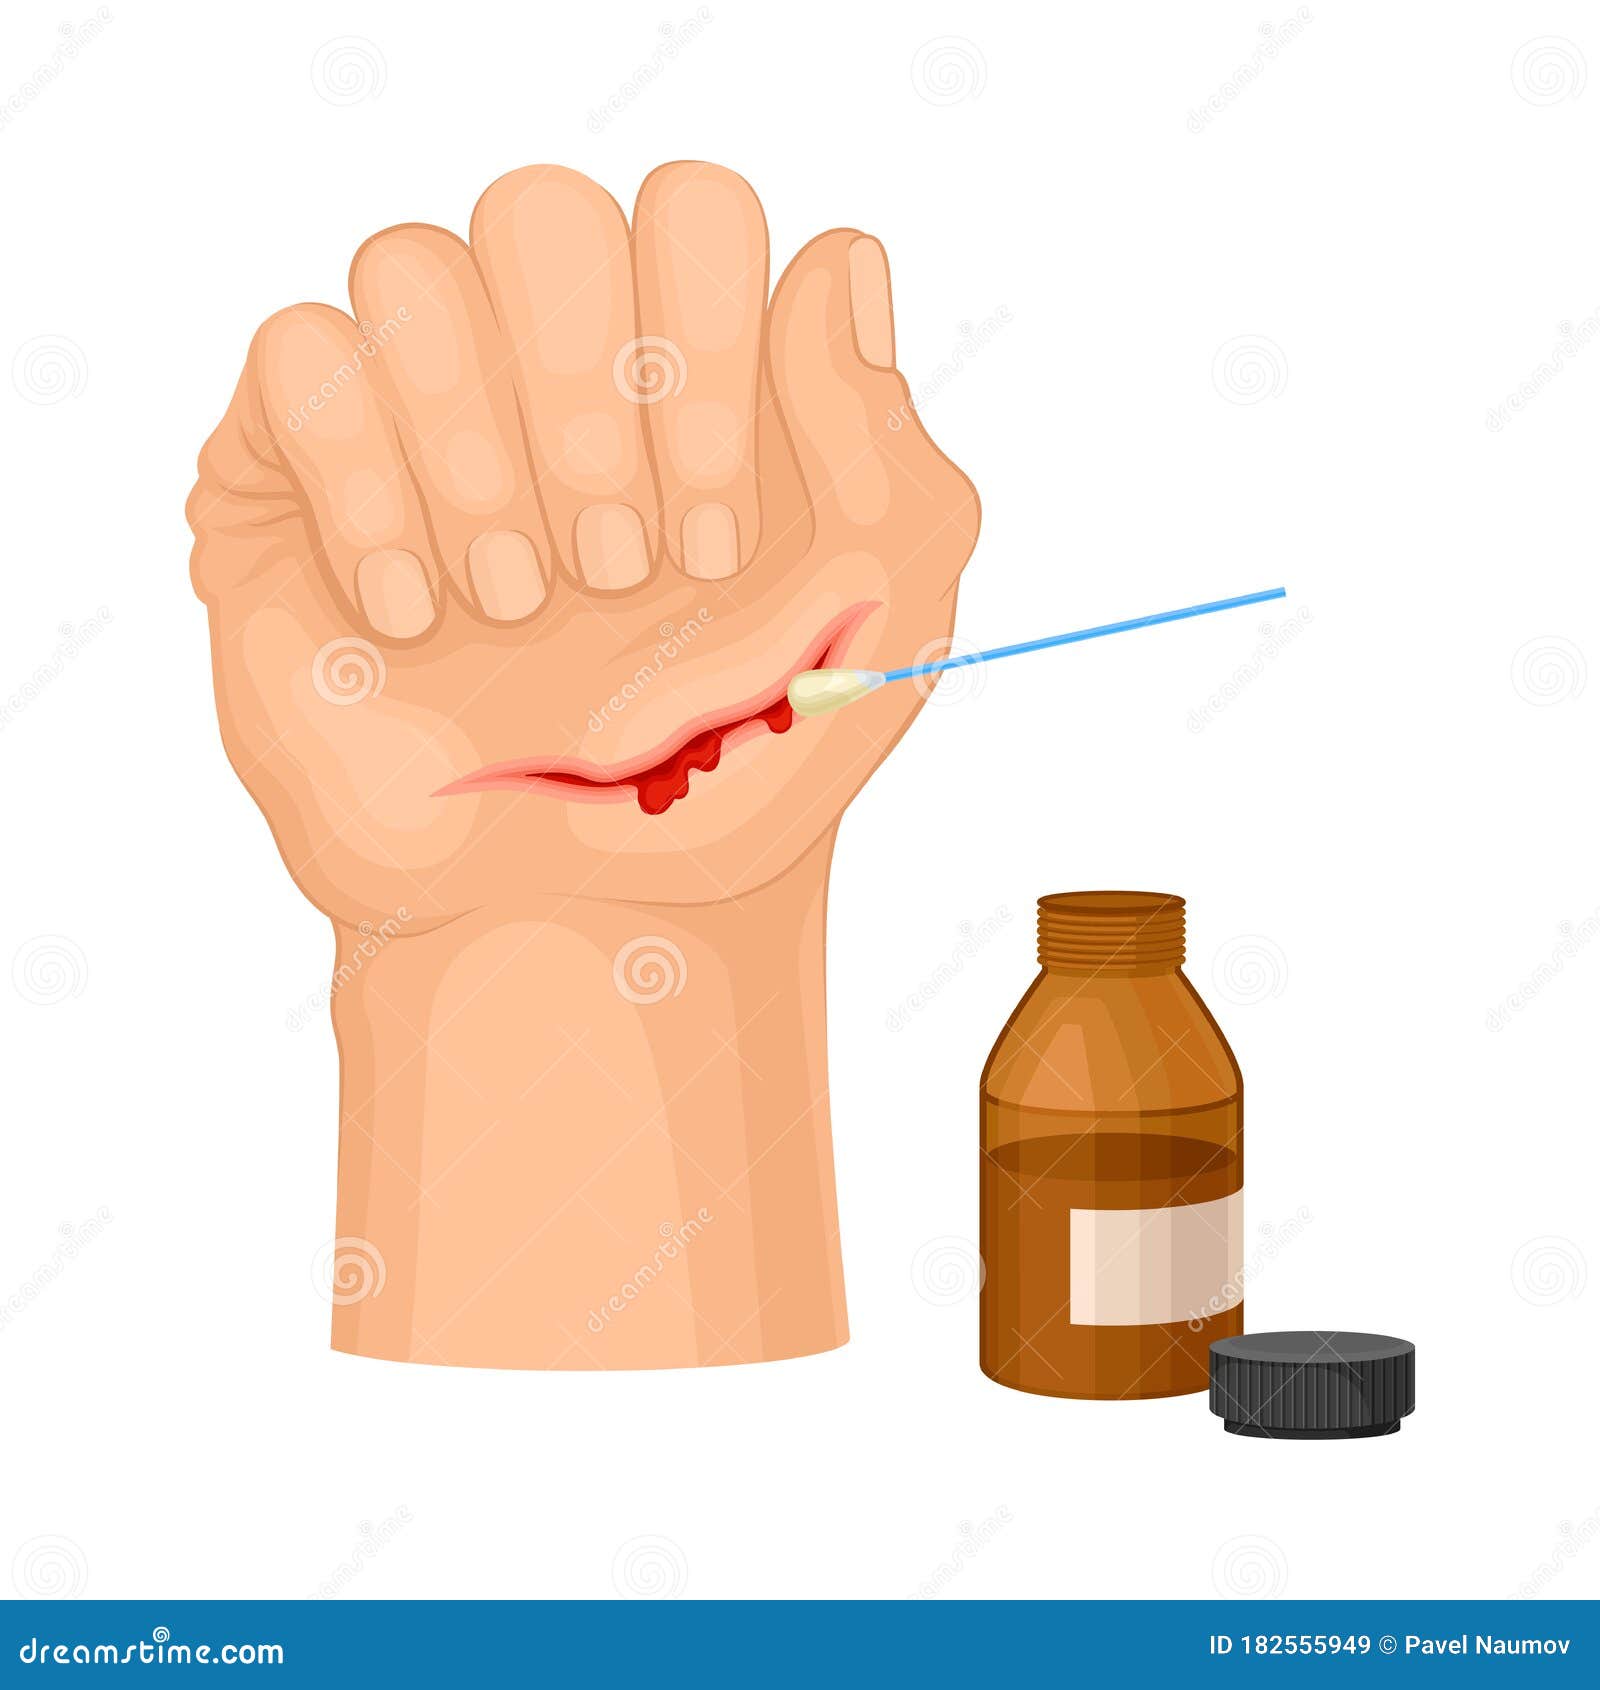 Hand with Wound Streaming Blood Cleaning with Pharmaceutical Substance ...